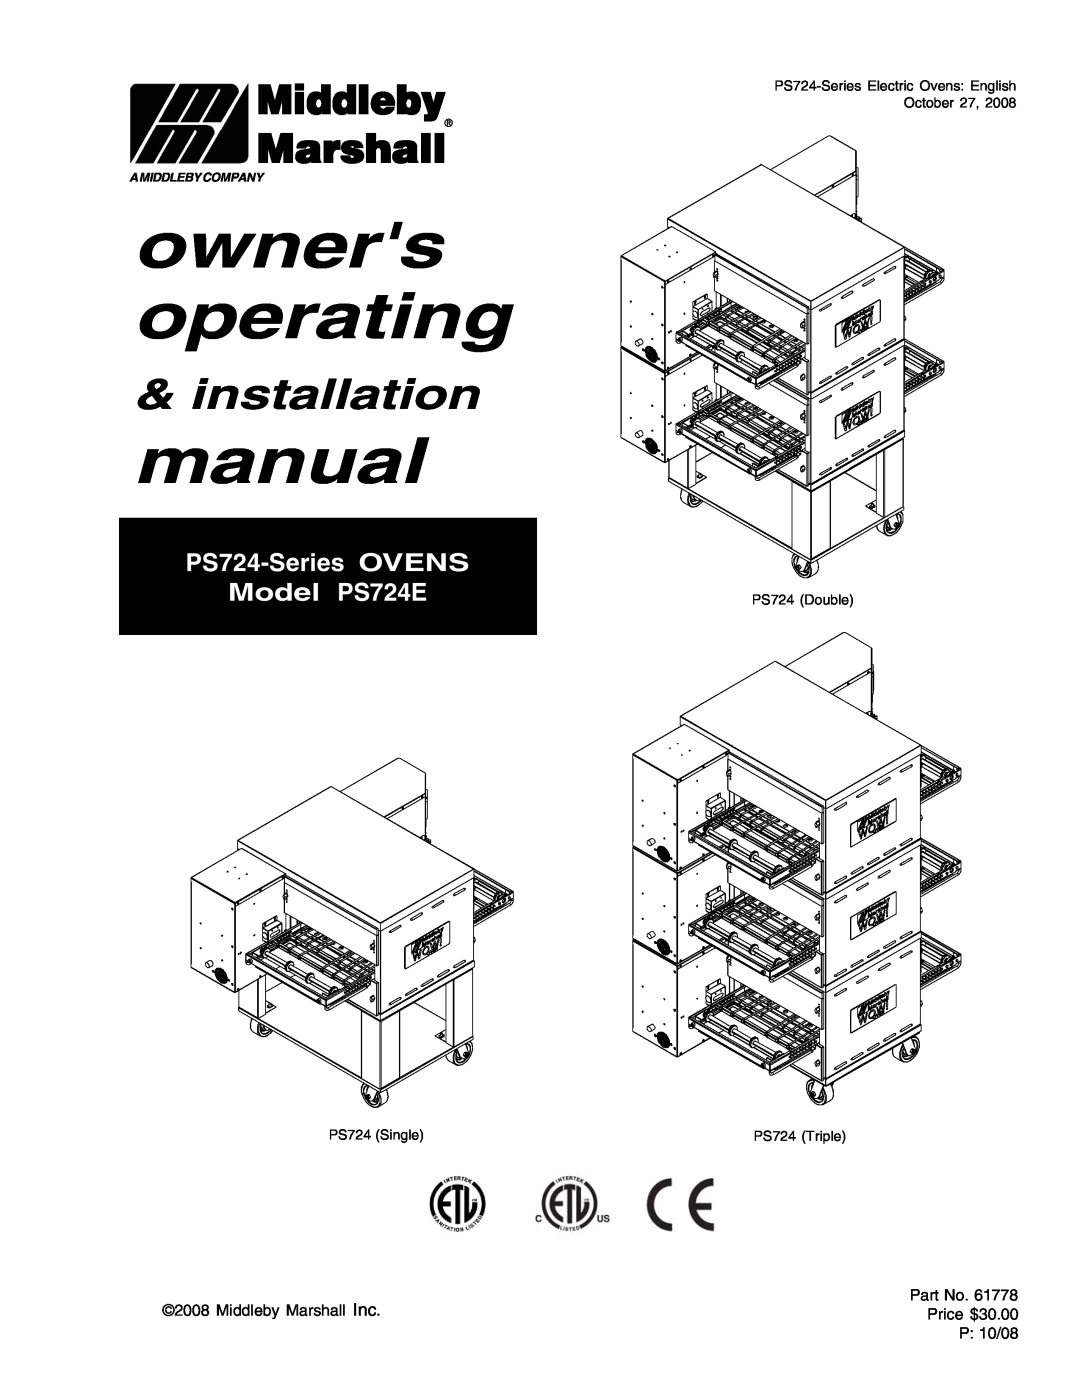 Middleby Marshall installation manual owners operating, Middleby, Marshall, PS724-Series OVENS Model PS724E 